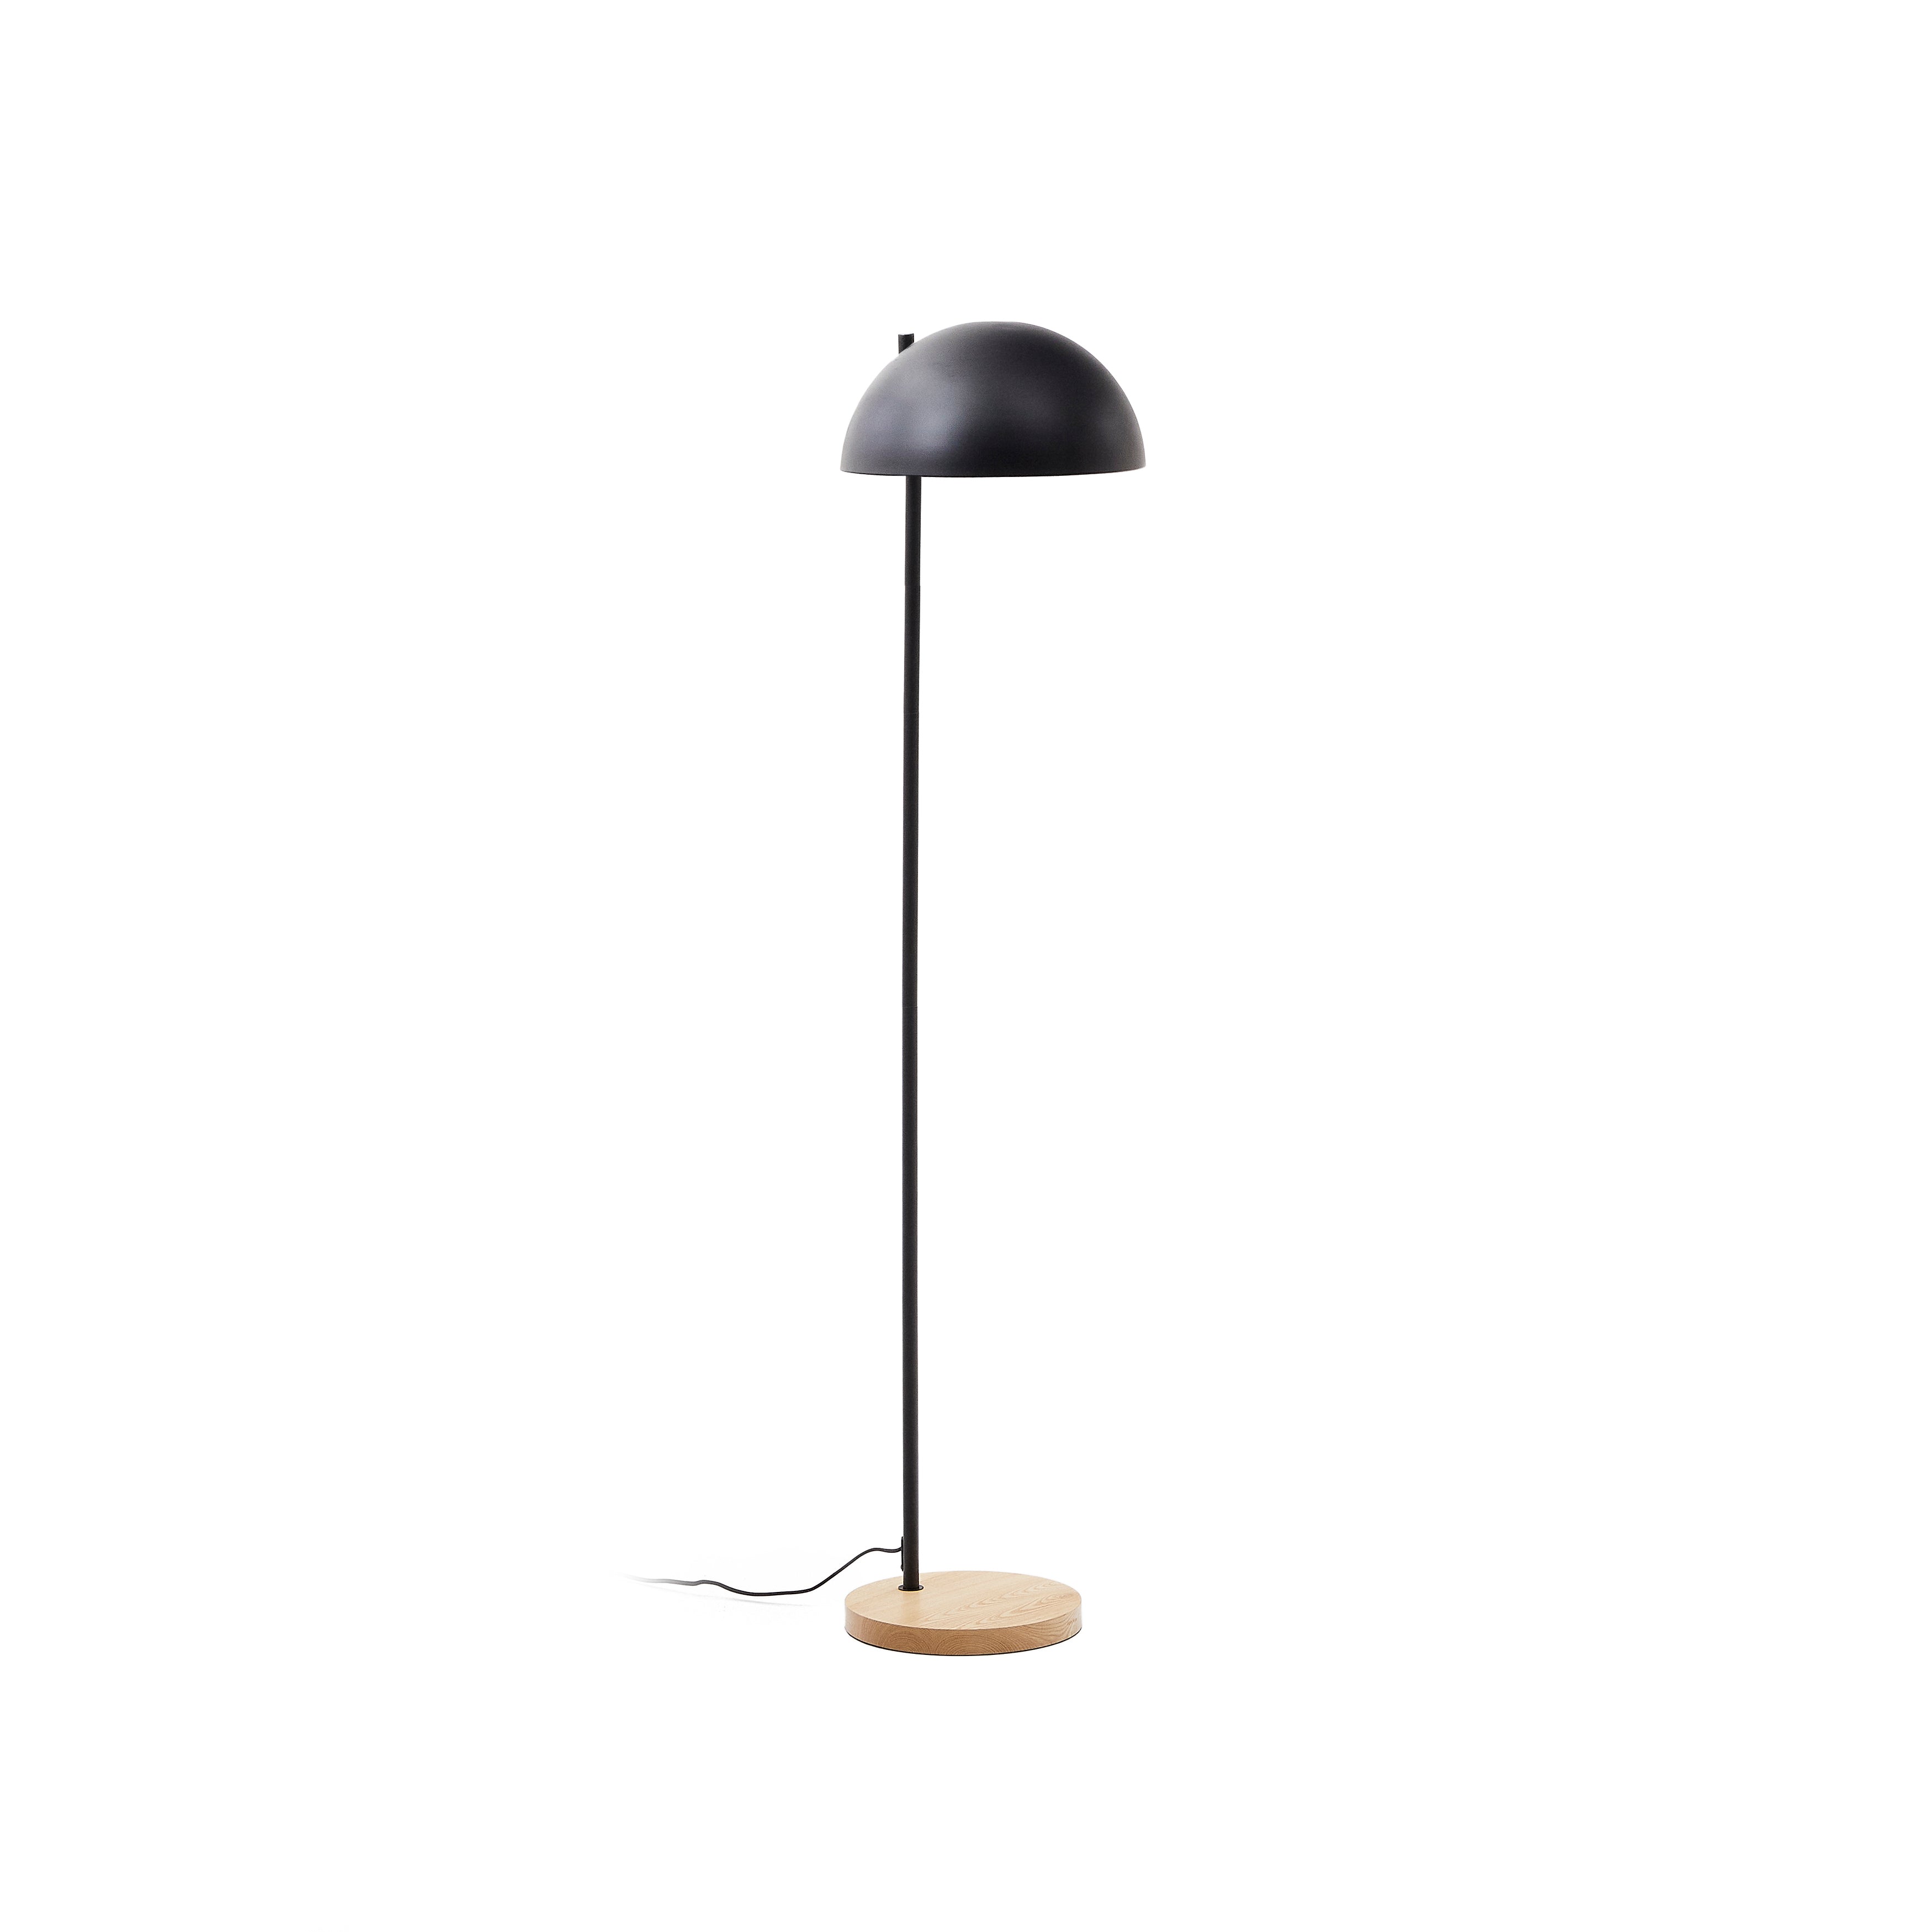 Catlar ash wood and metal floor lamp with black painted finish